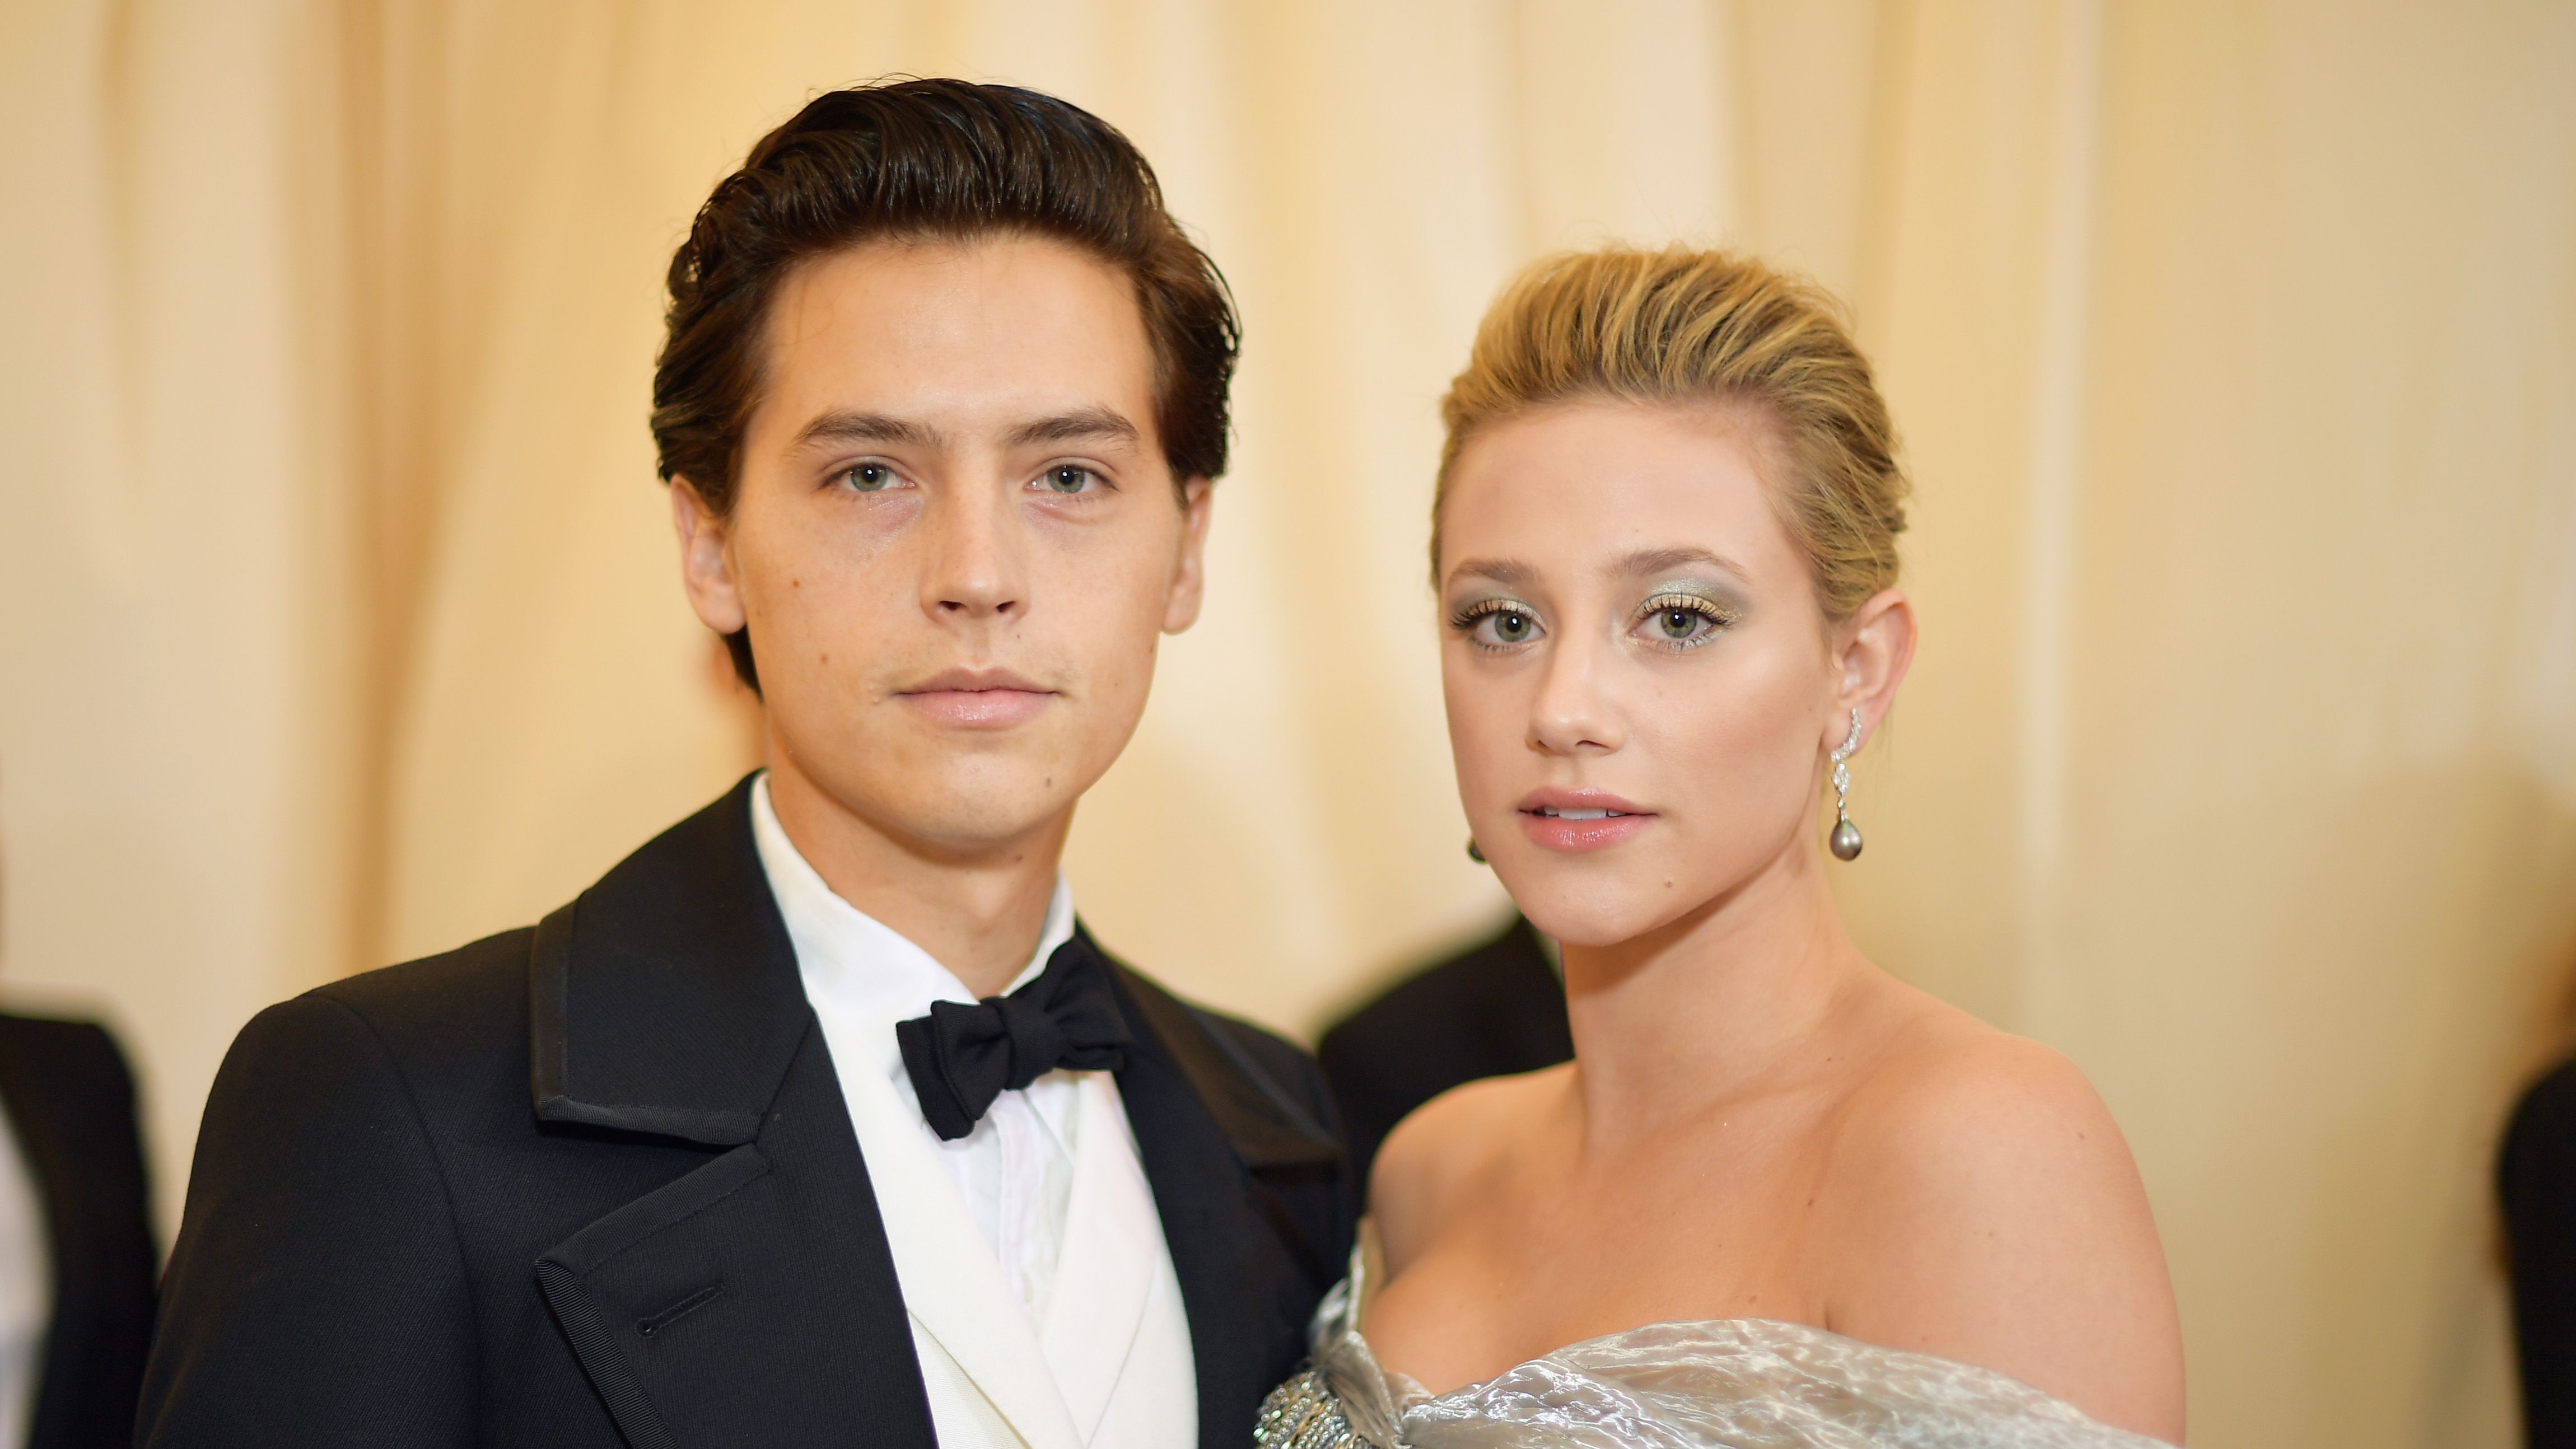 Looks Like Lili Reinhart Is Still Dating Cole Sprouse